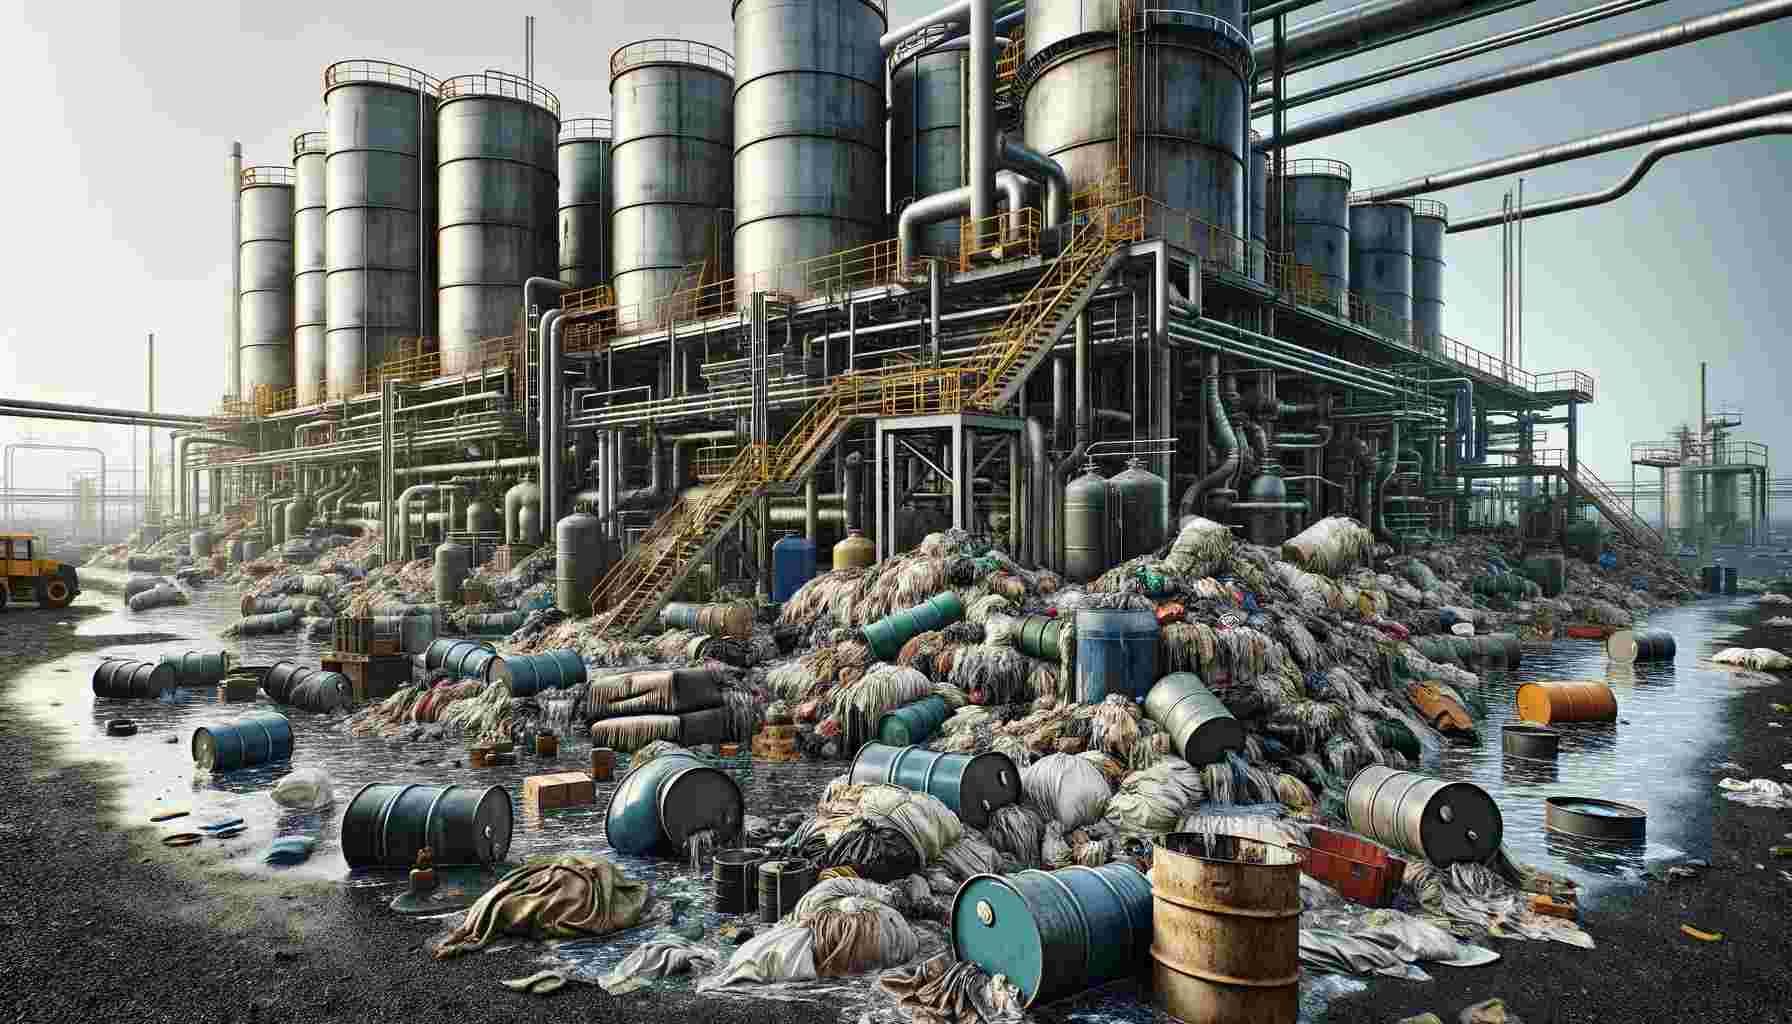 A Detailed Scene Depicting Oil Containing Waste at Compressed